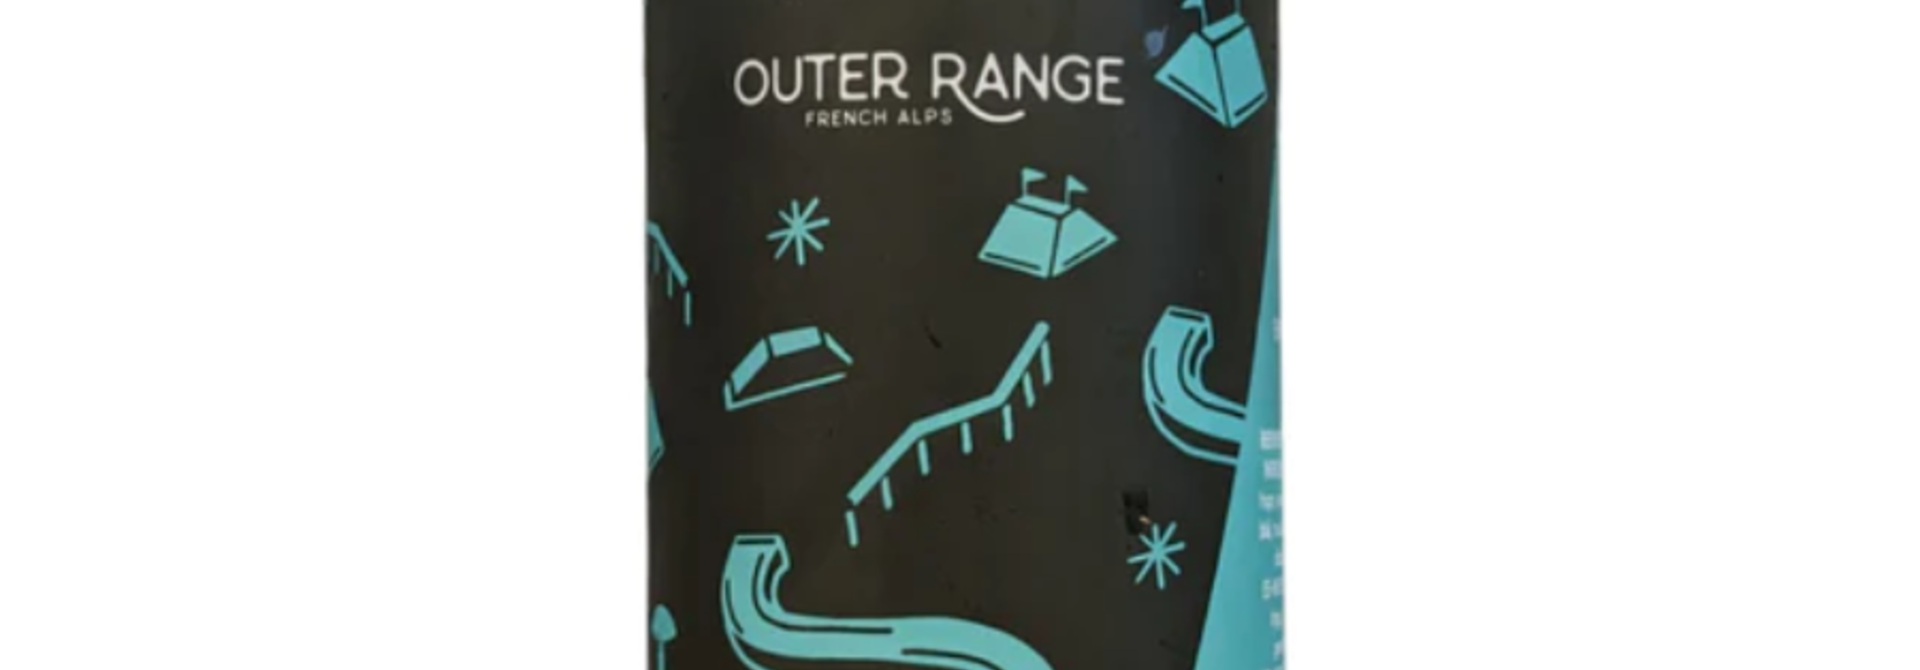 Outer Range French Alps Park Laps 44CL 7%